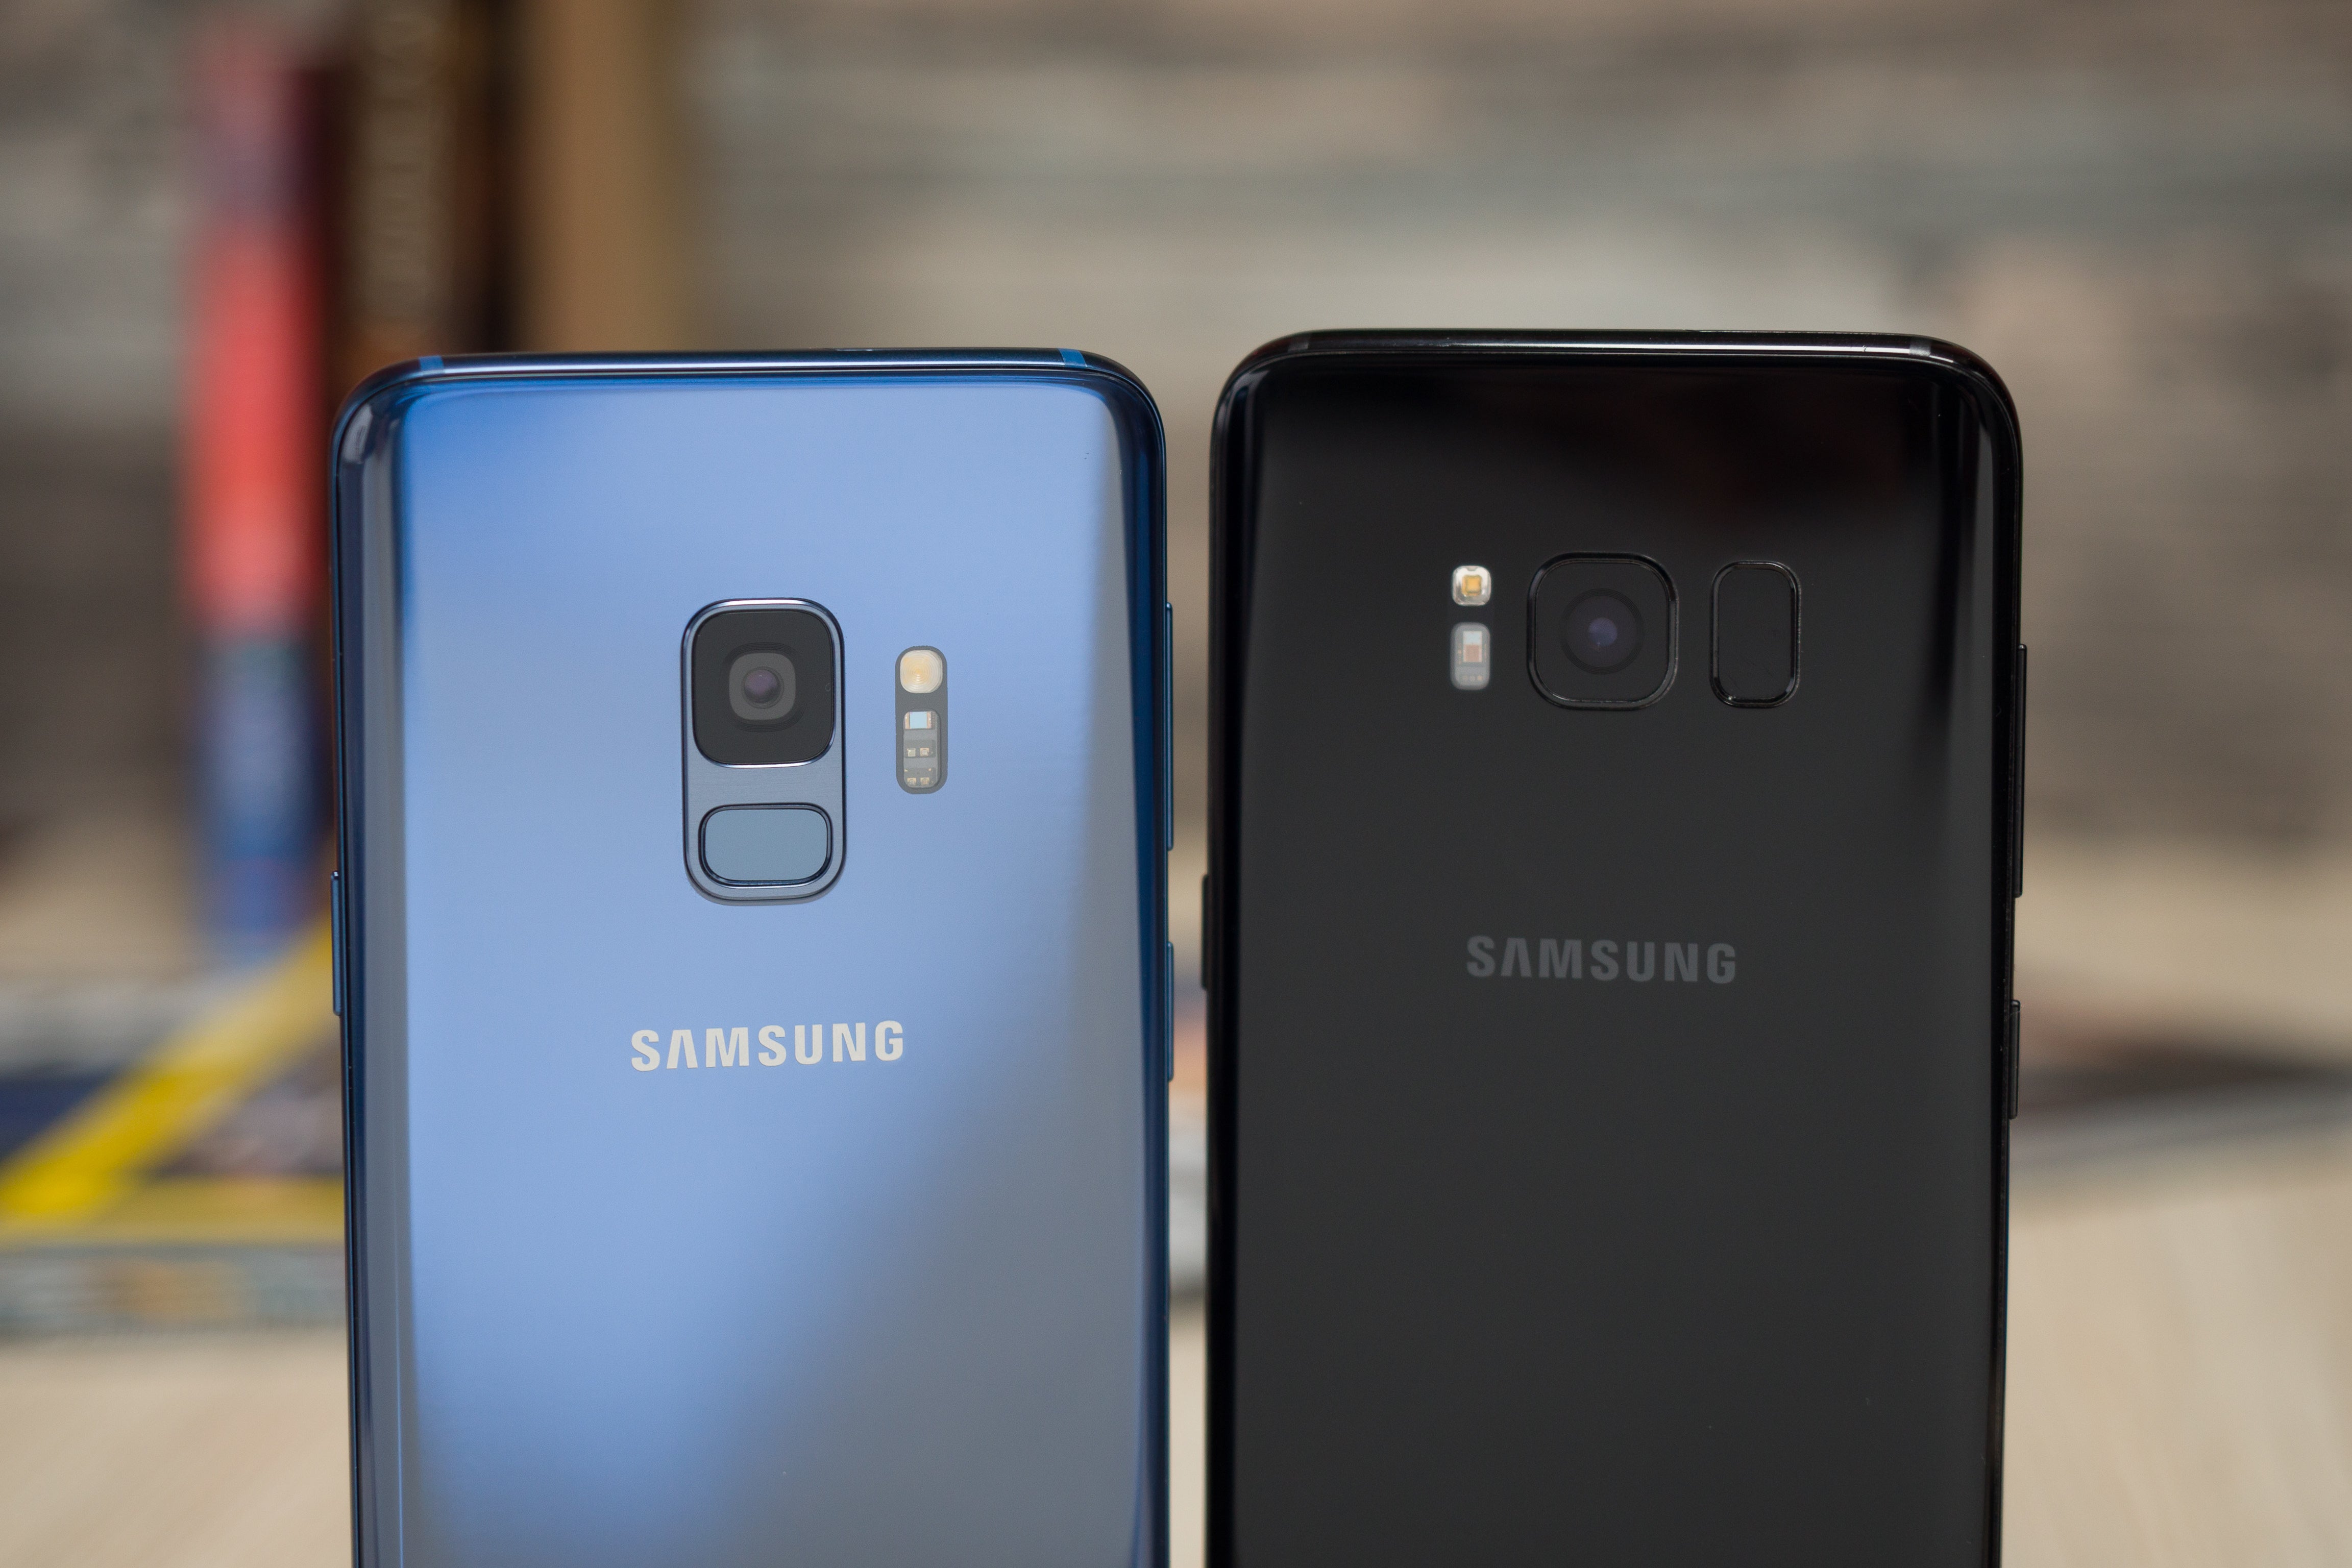 Great deal: Save $150 on the AT&amp;T Samsung Galaxy S9, $200 on the Galaxy S9+